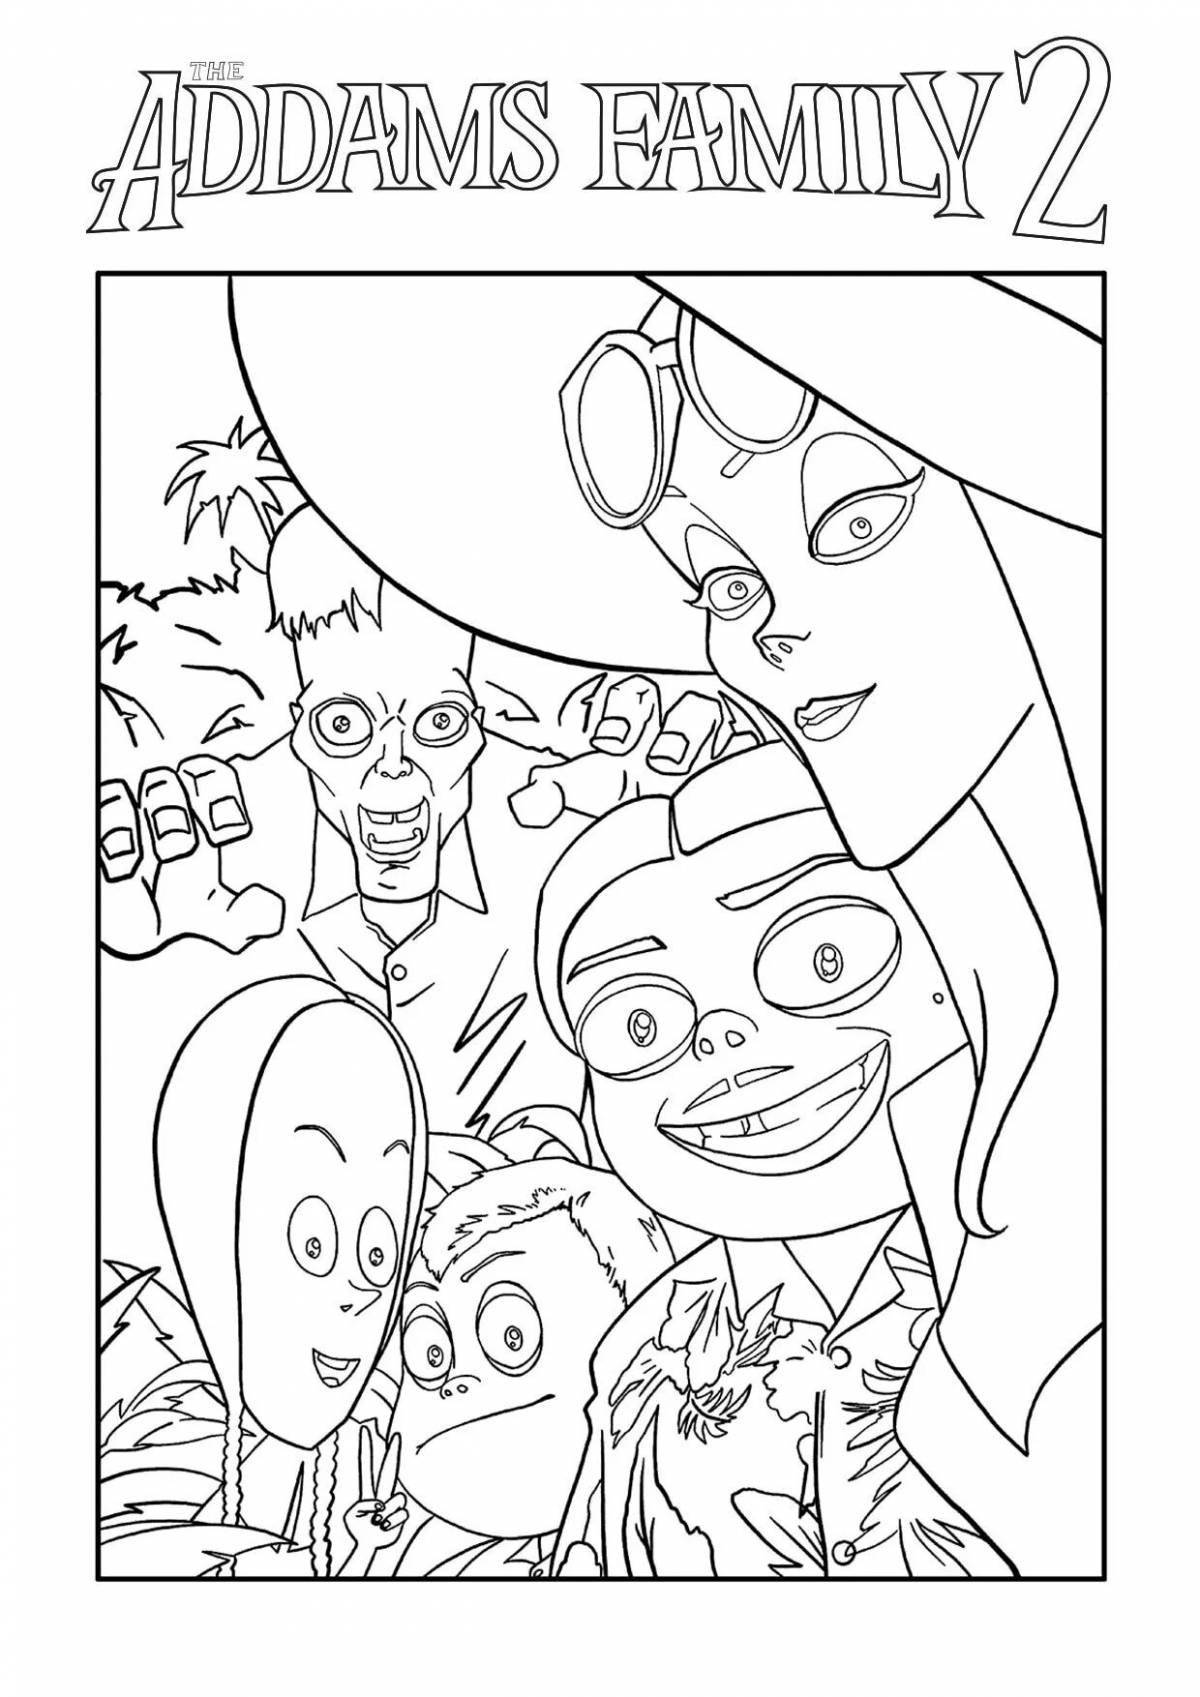 Ghoulish Addams Family coloring book